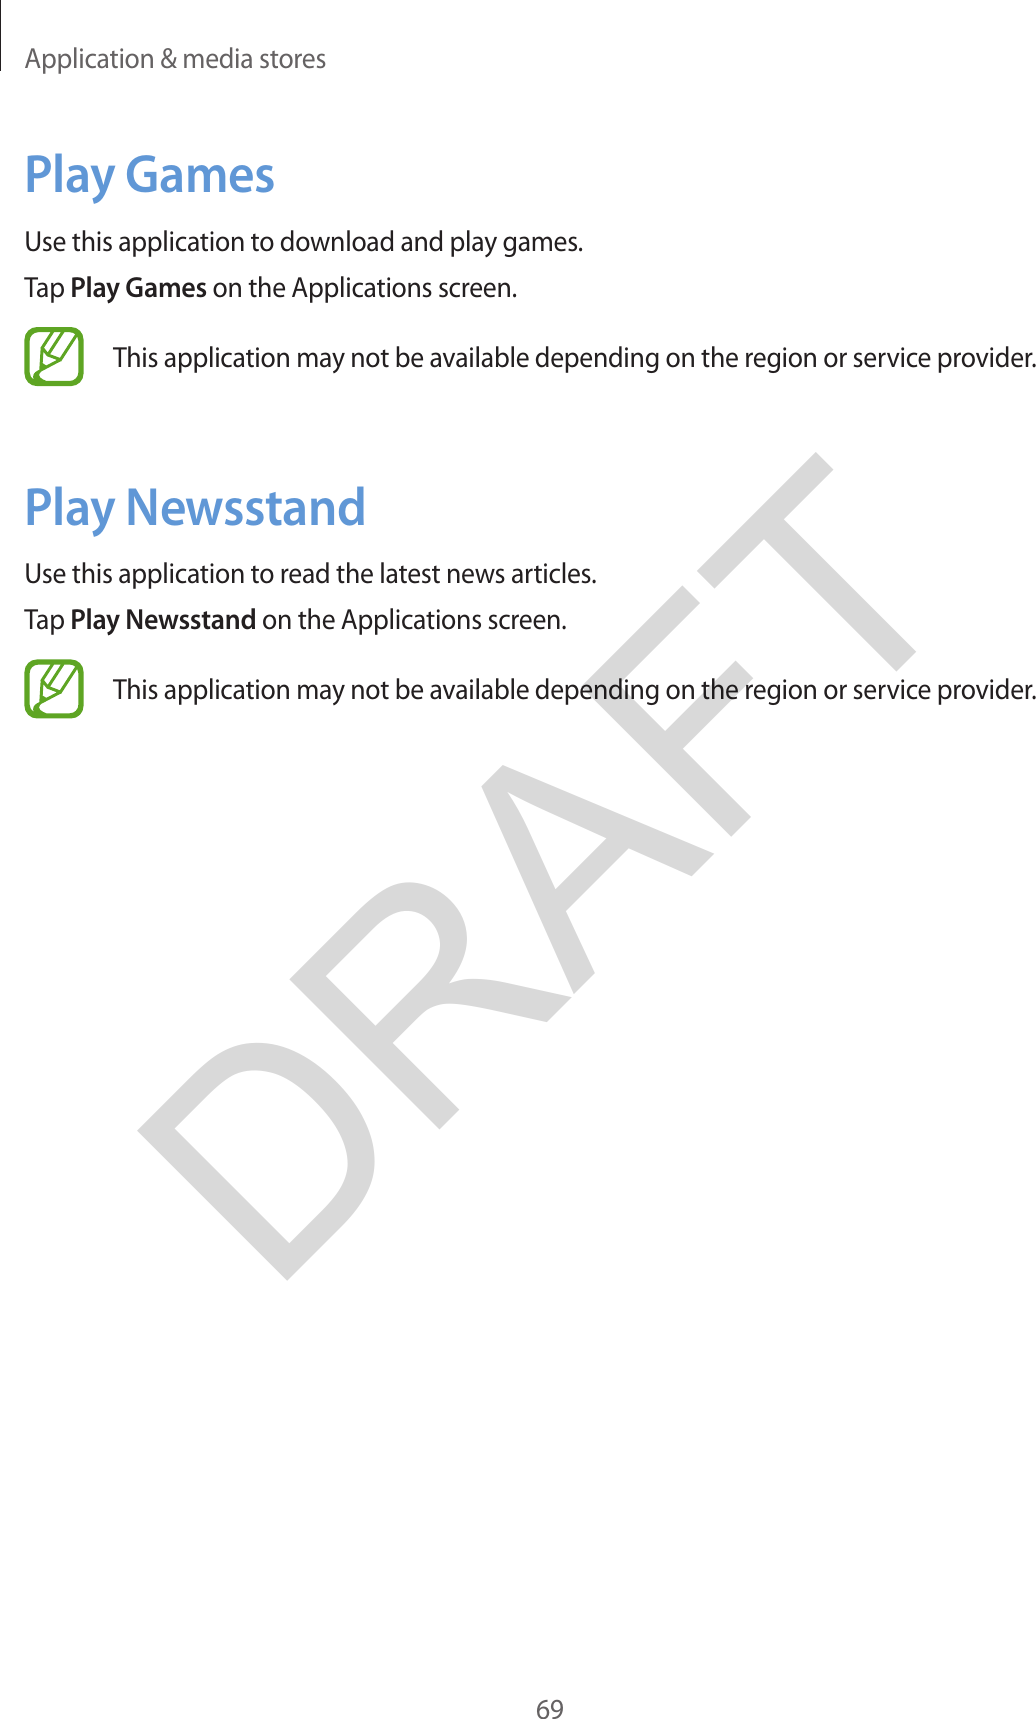 Application &amp; media stores69Play GamesUse this application to download and play games.Tap Play Games on the Applications screen.This application may not be available depending on the region or service provider.Play NewsstandUse this application to read the latest news articles.Tap Play Newsstand on the Applications screen.This application may not be available depending on the region or service provider.DRAFT